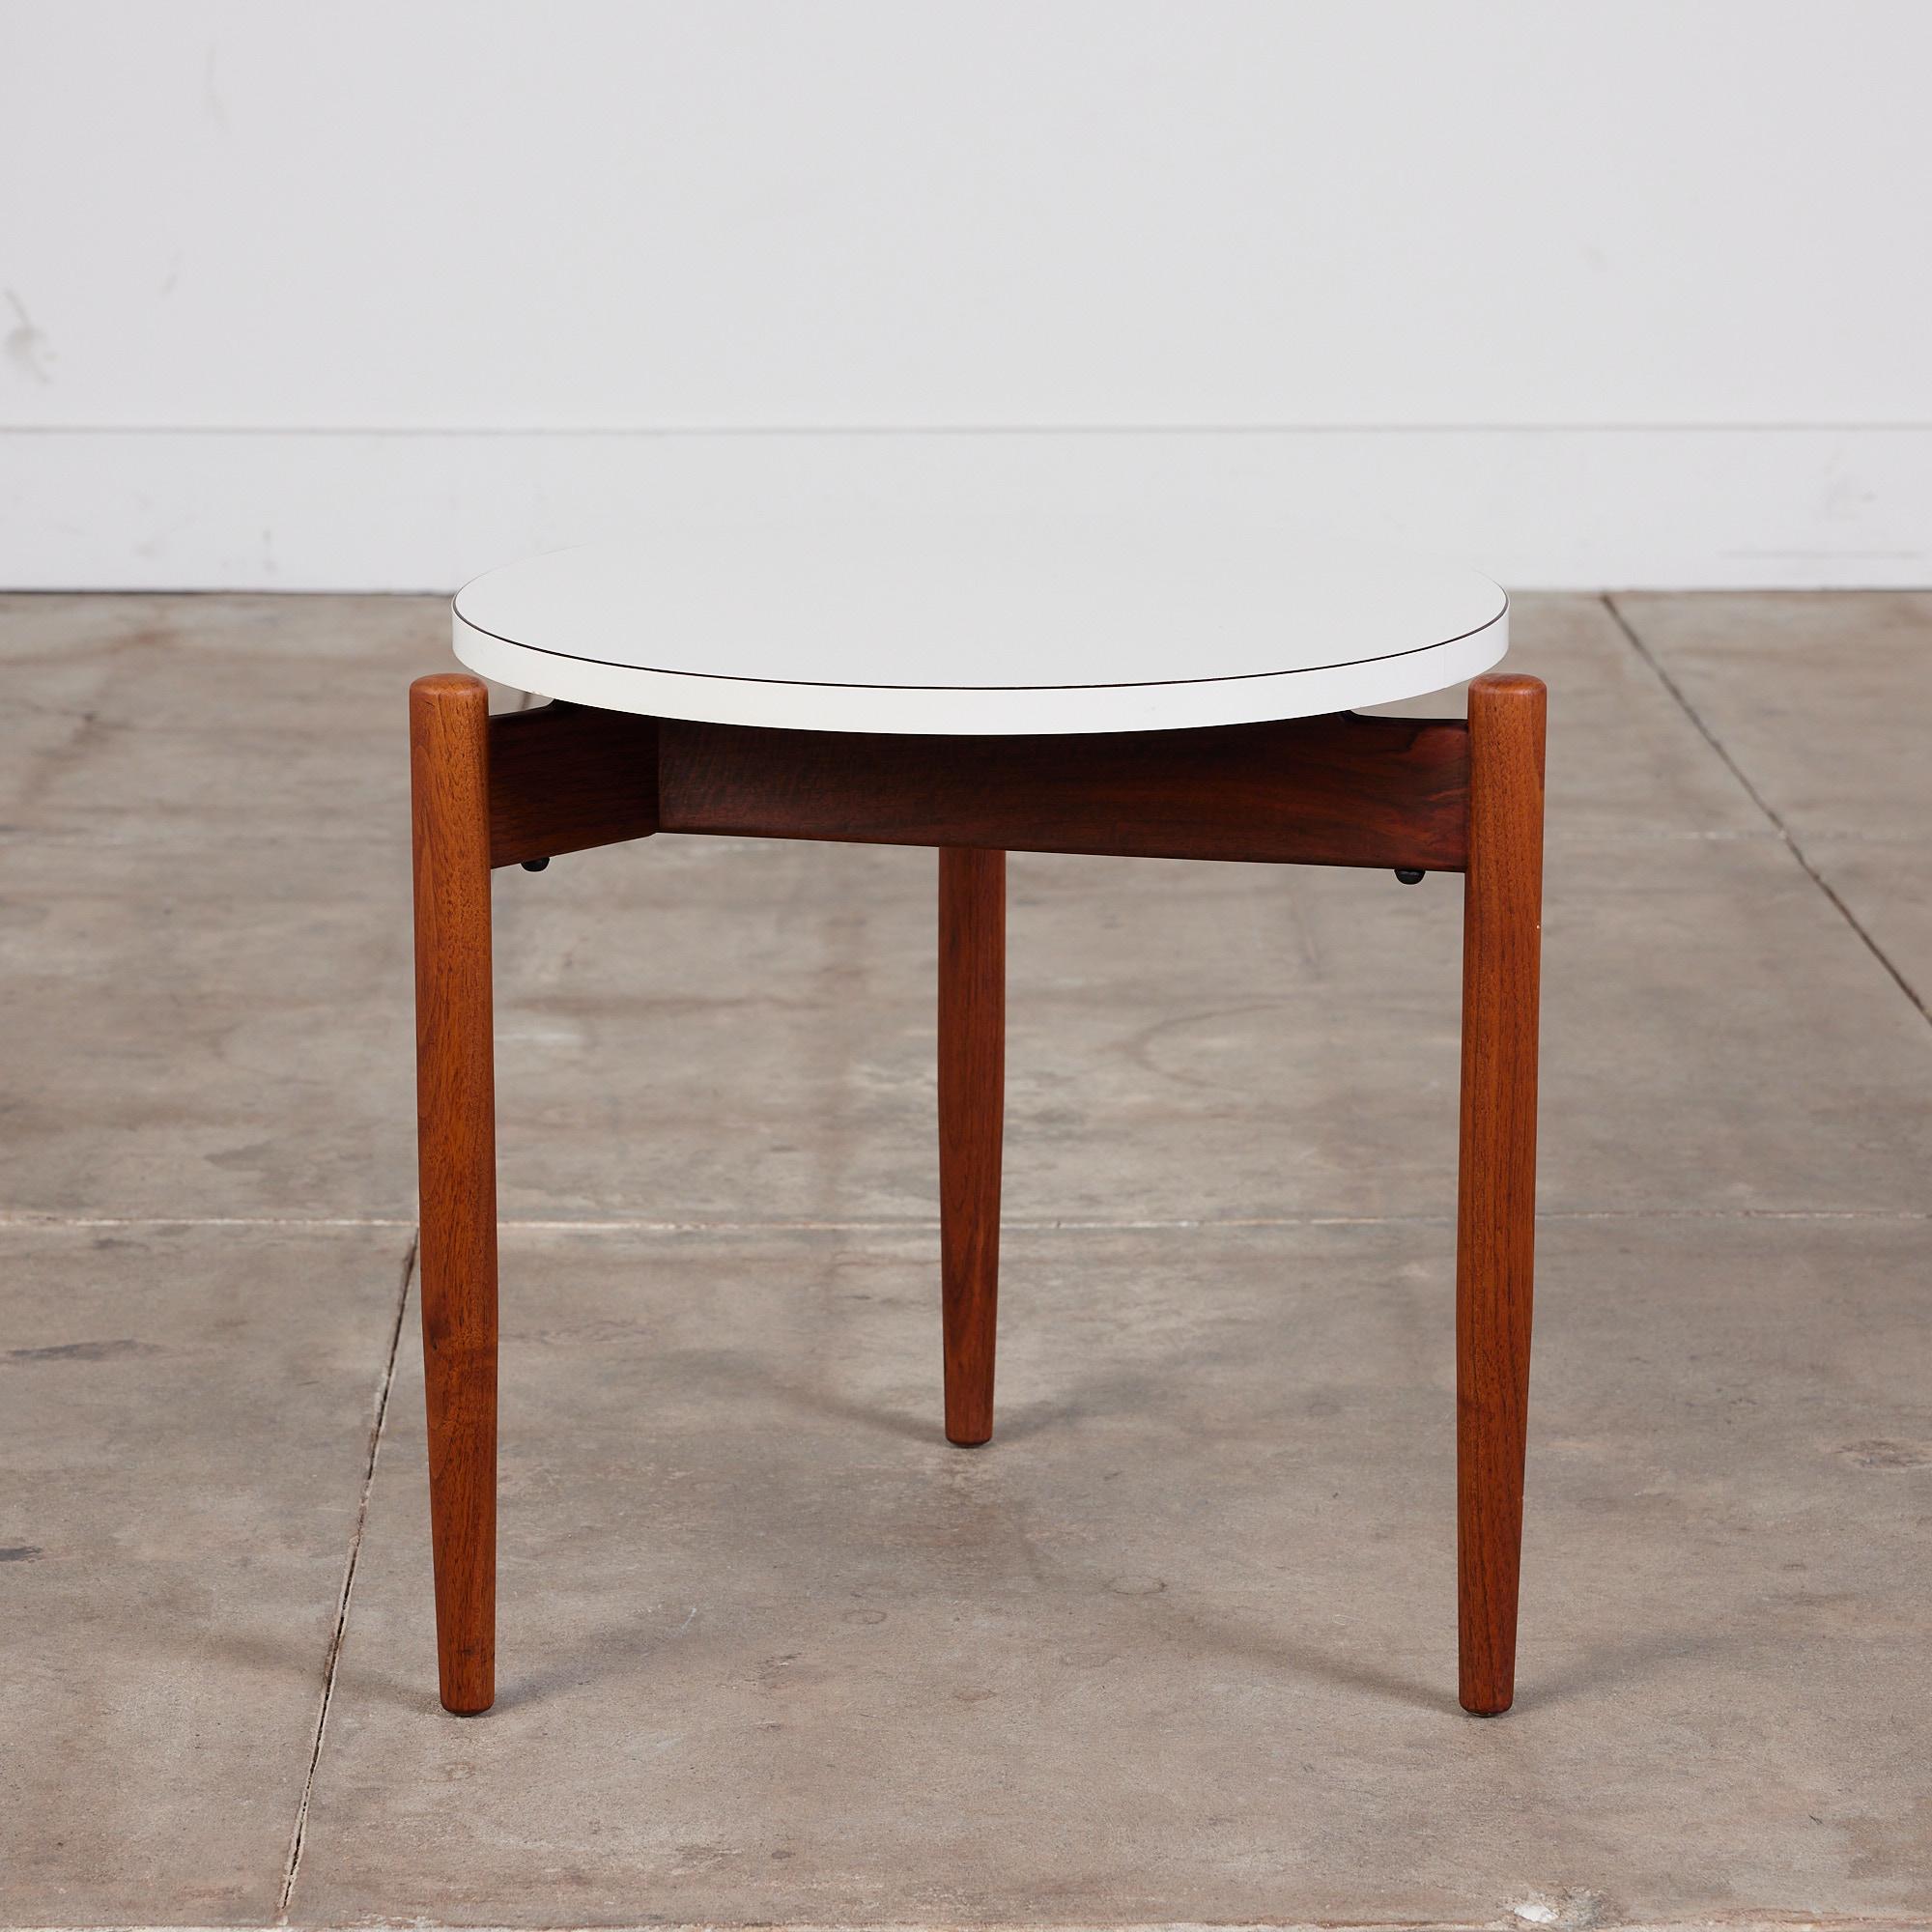 Round walnut side table by Jens Risom for Risom Design, USA, c.1960s. The table features a round white laminate table top with three tapered legs that sit proud of the edge of the laminate table top.

Dimensions: 19.5